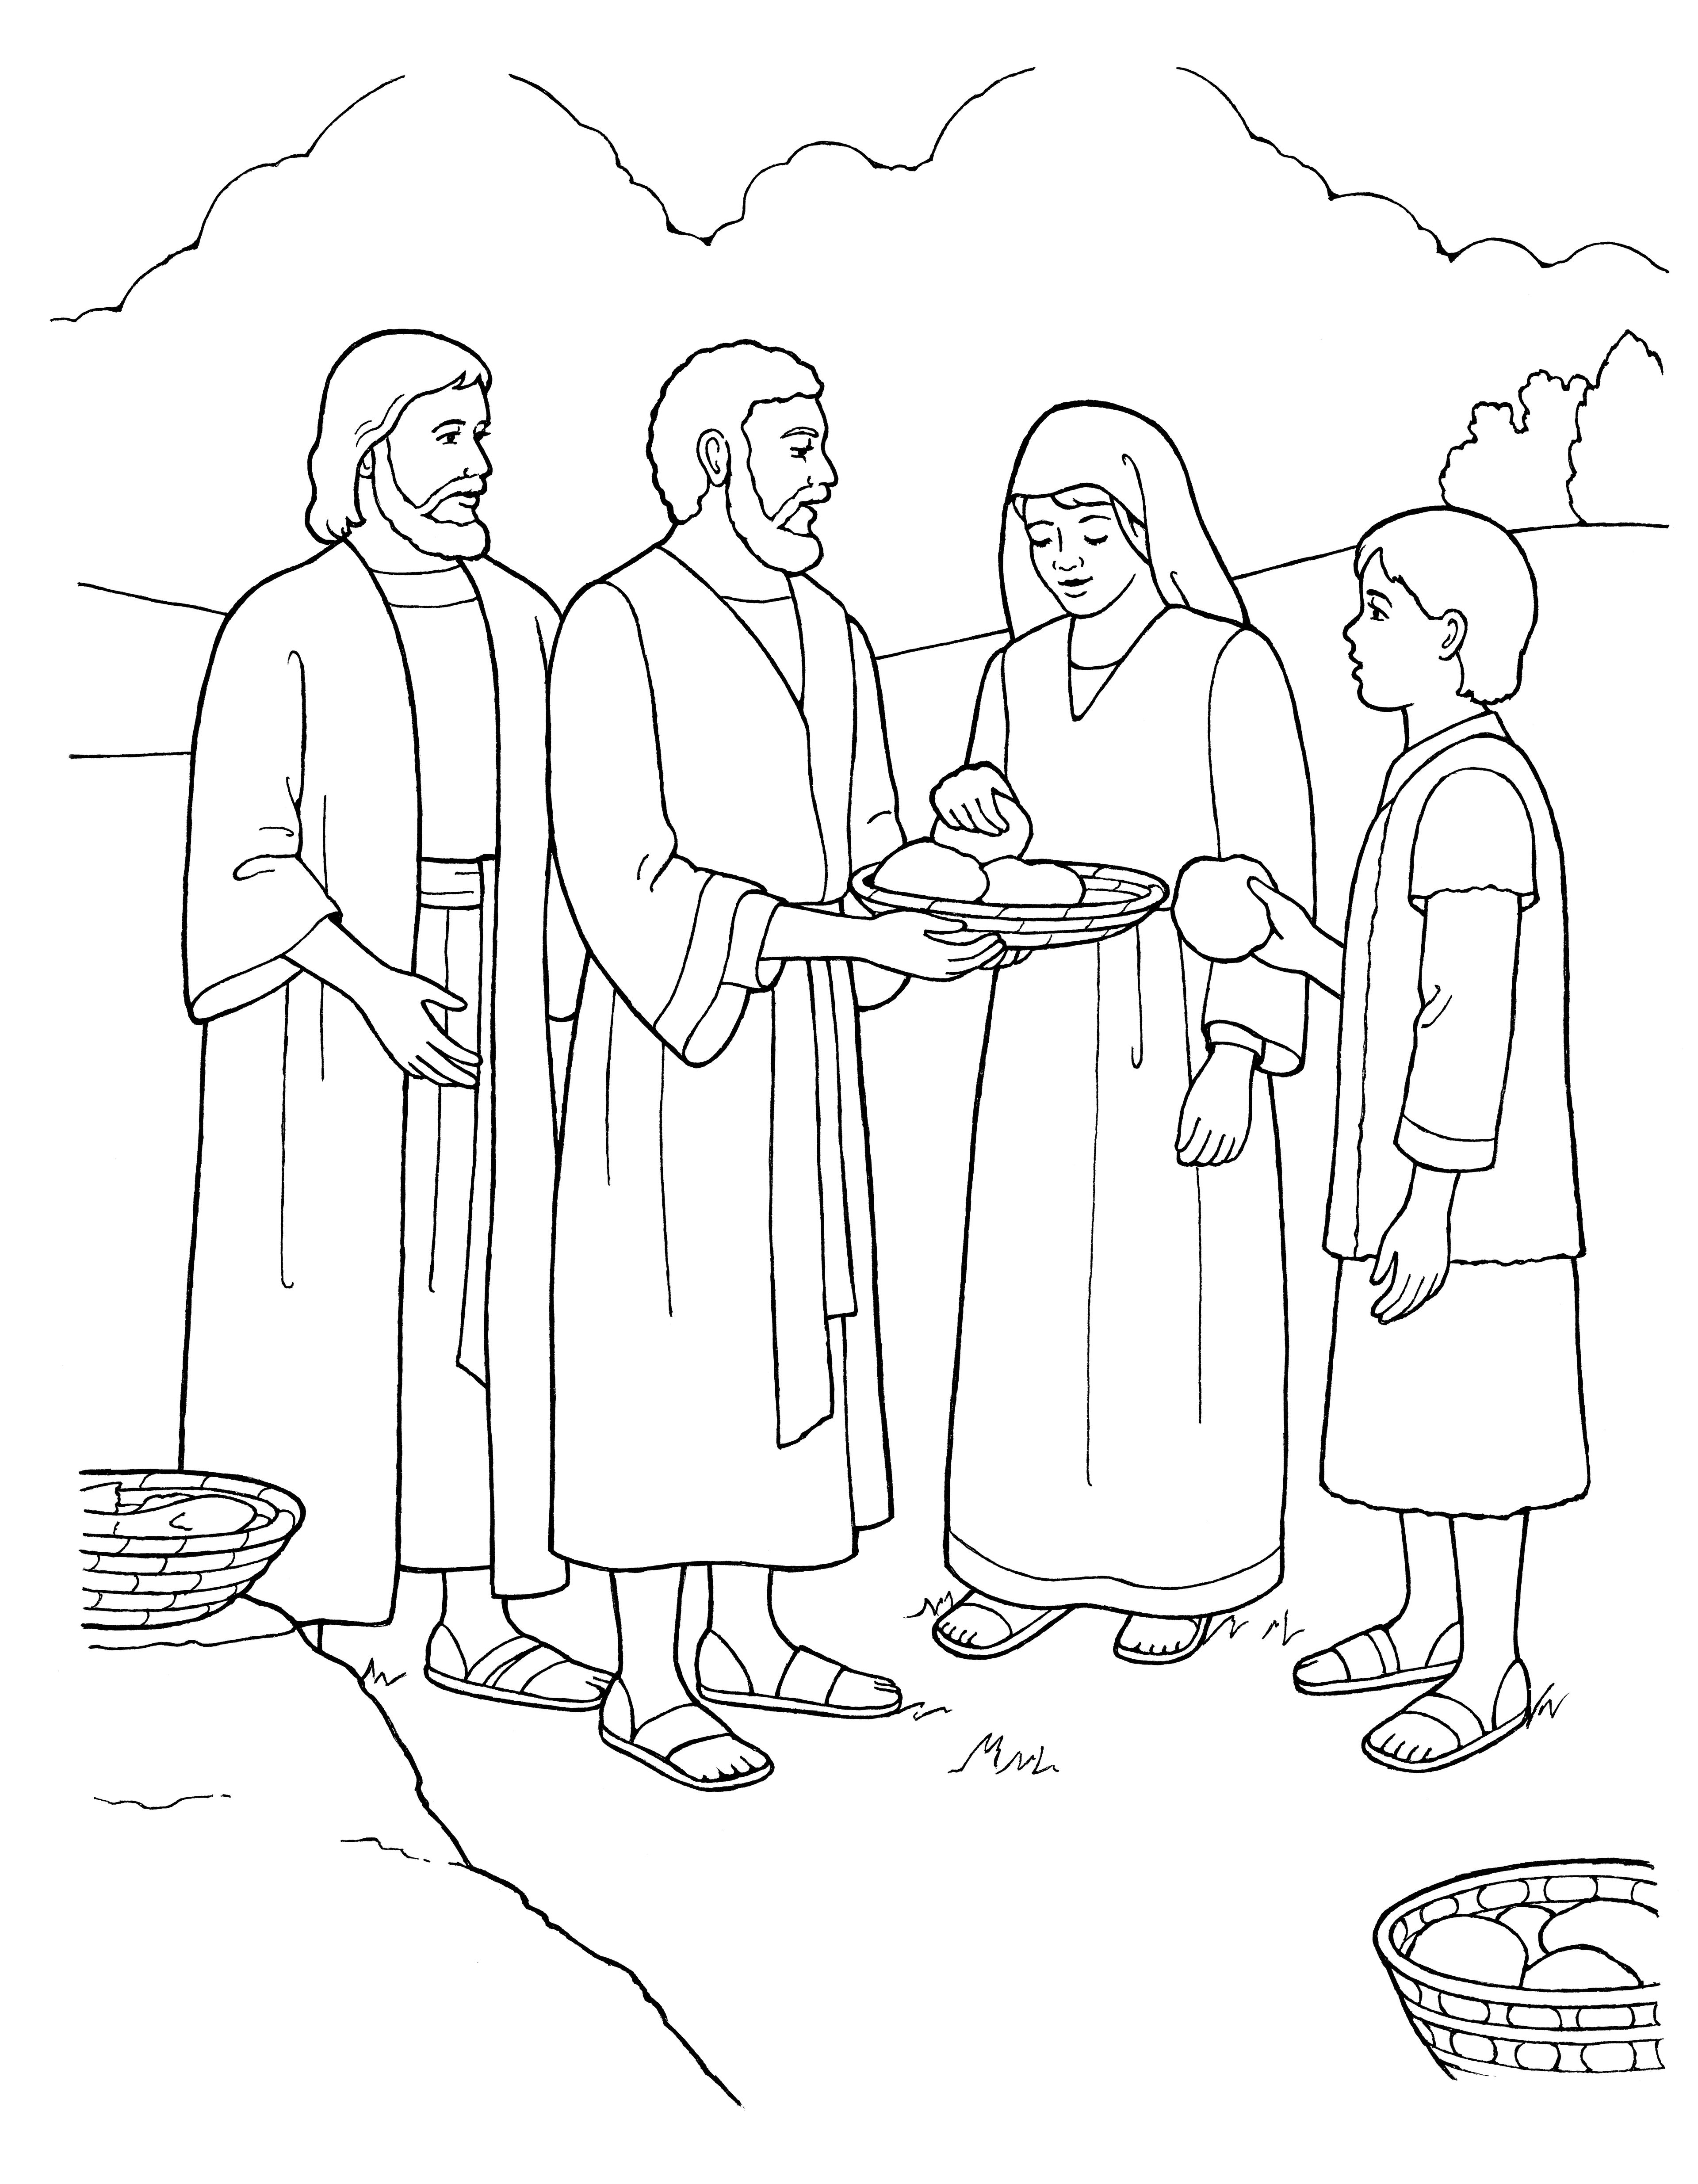 An illustration of Christ feeding and caring for others, from the nursery manual Behold Your Little Ones (2008), page 27.